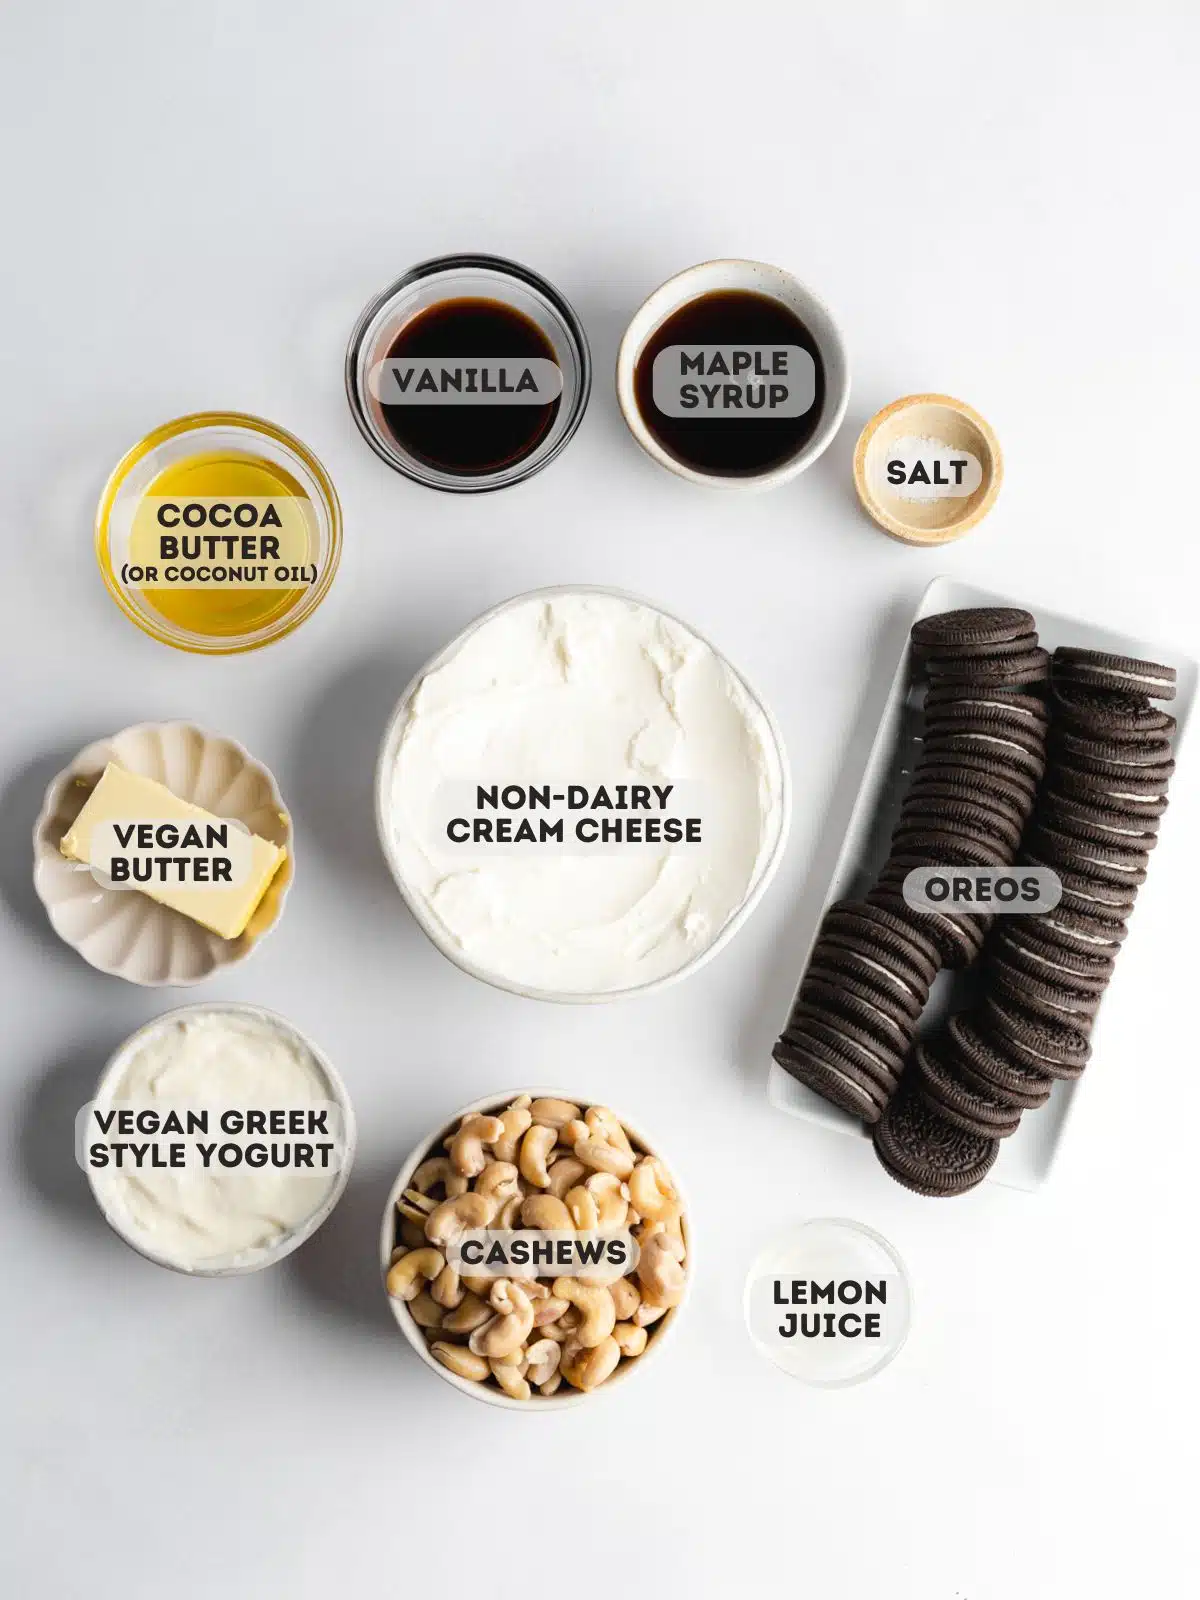 ingredients for vegan oreo cheesecake measured out in bowls on a white surface.